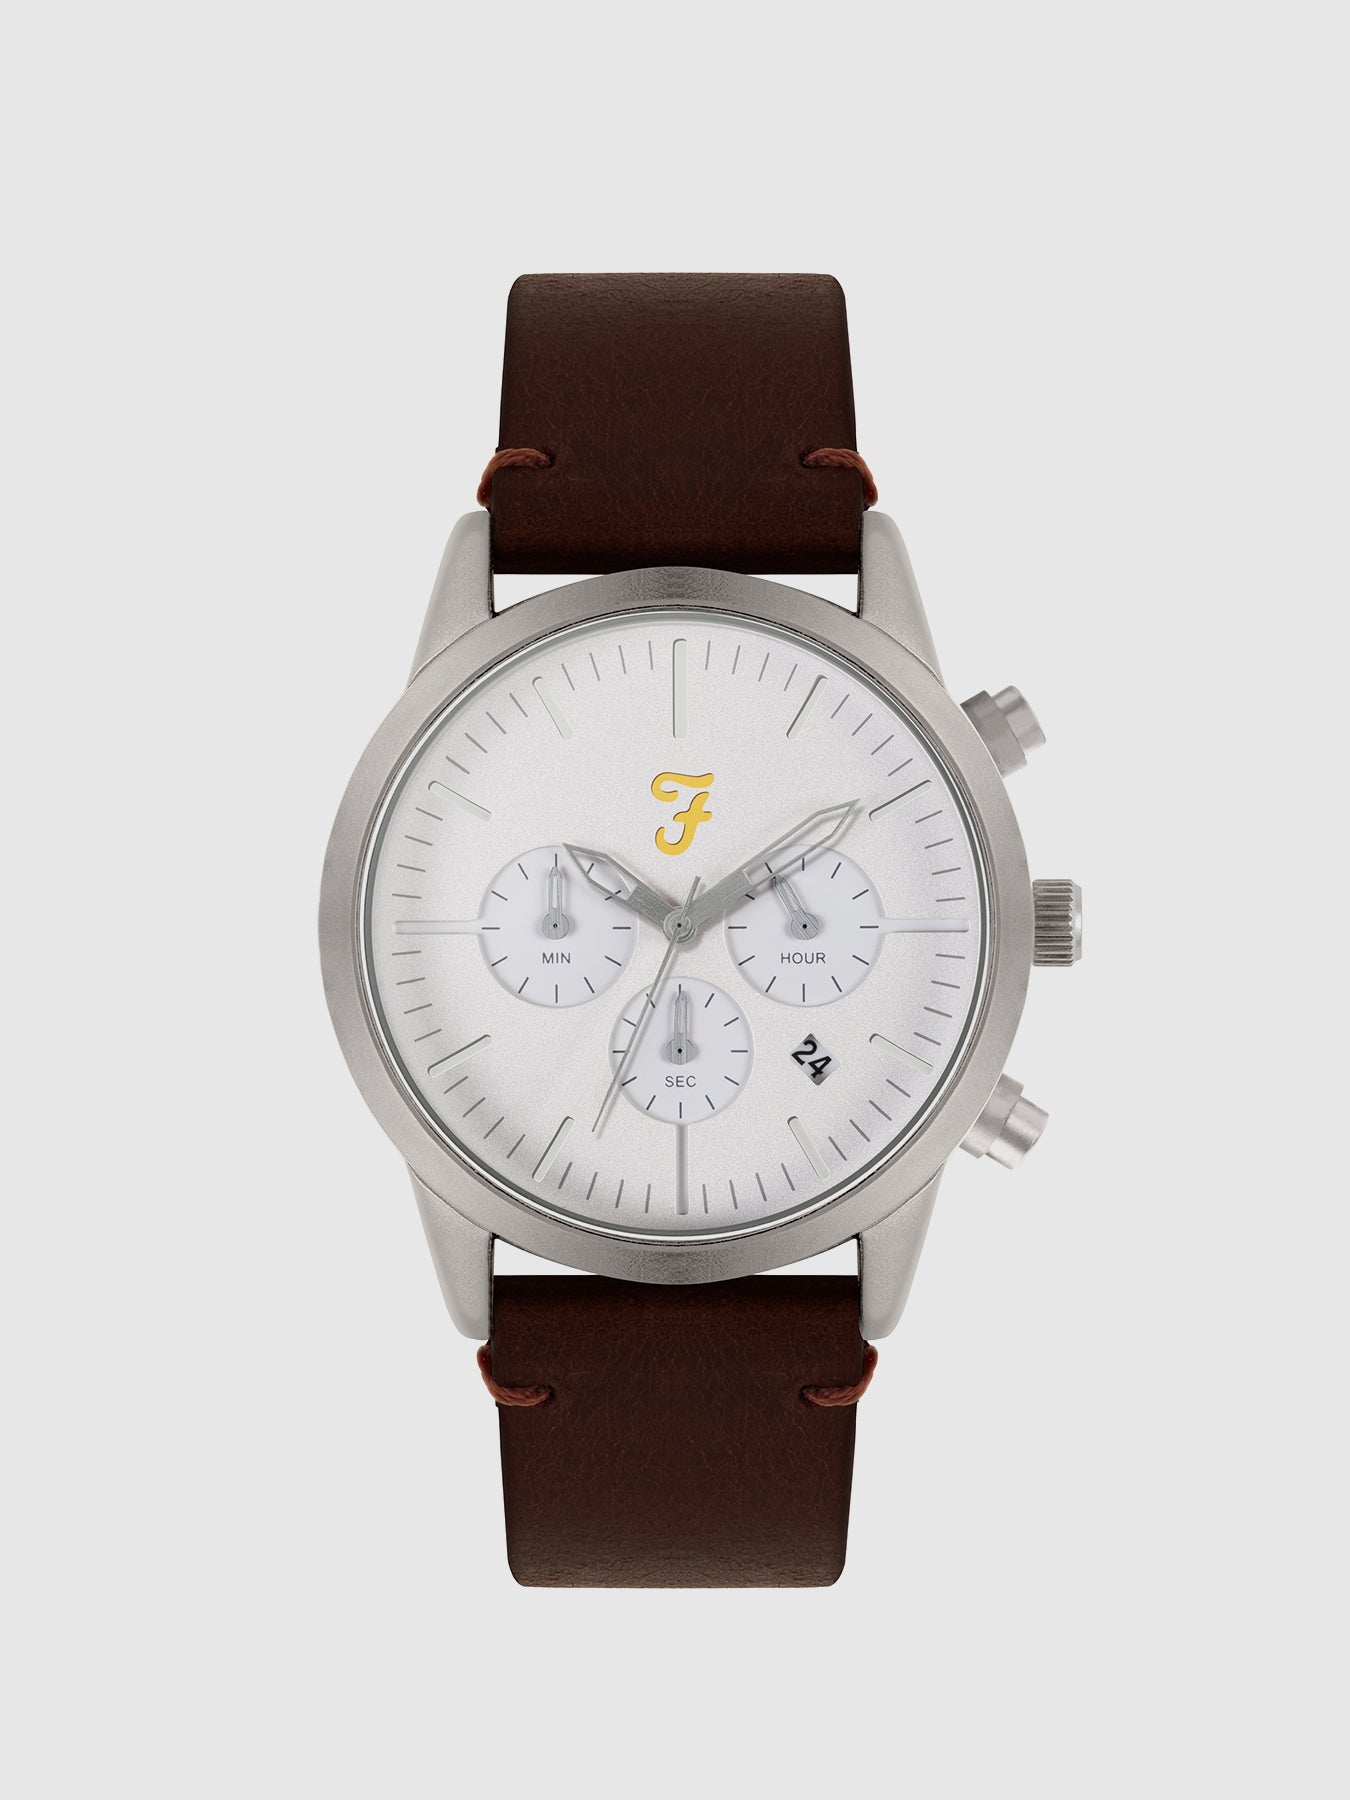 View Farah Chrono Watch With Leather Strap In Chestnut information